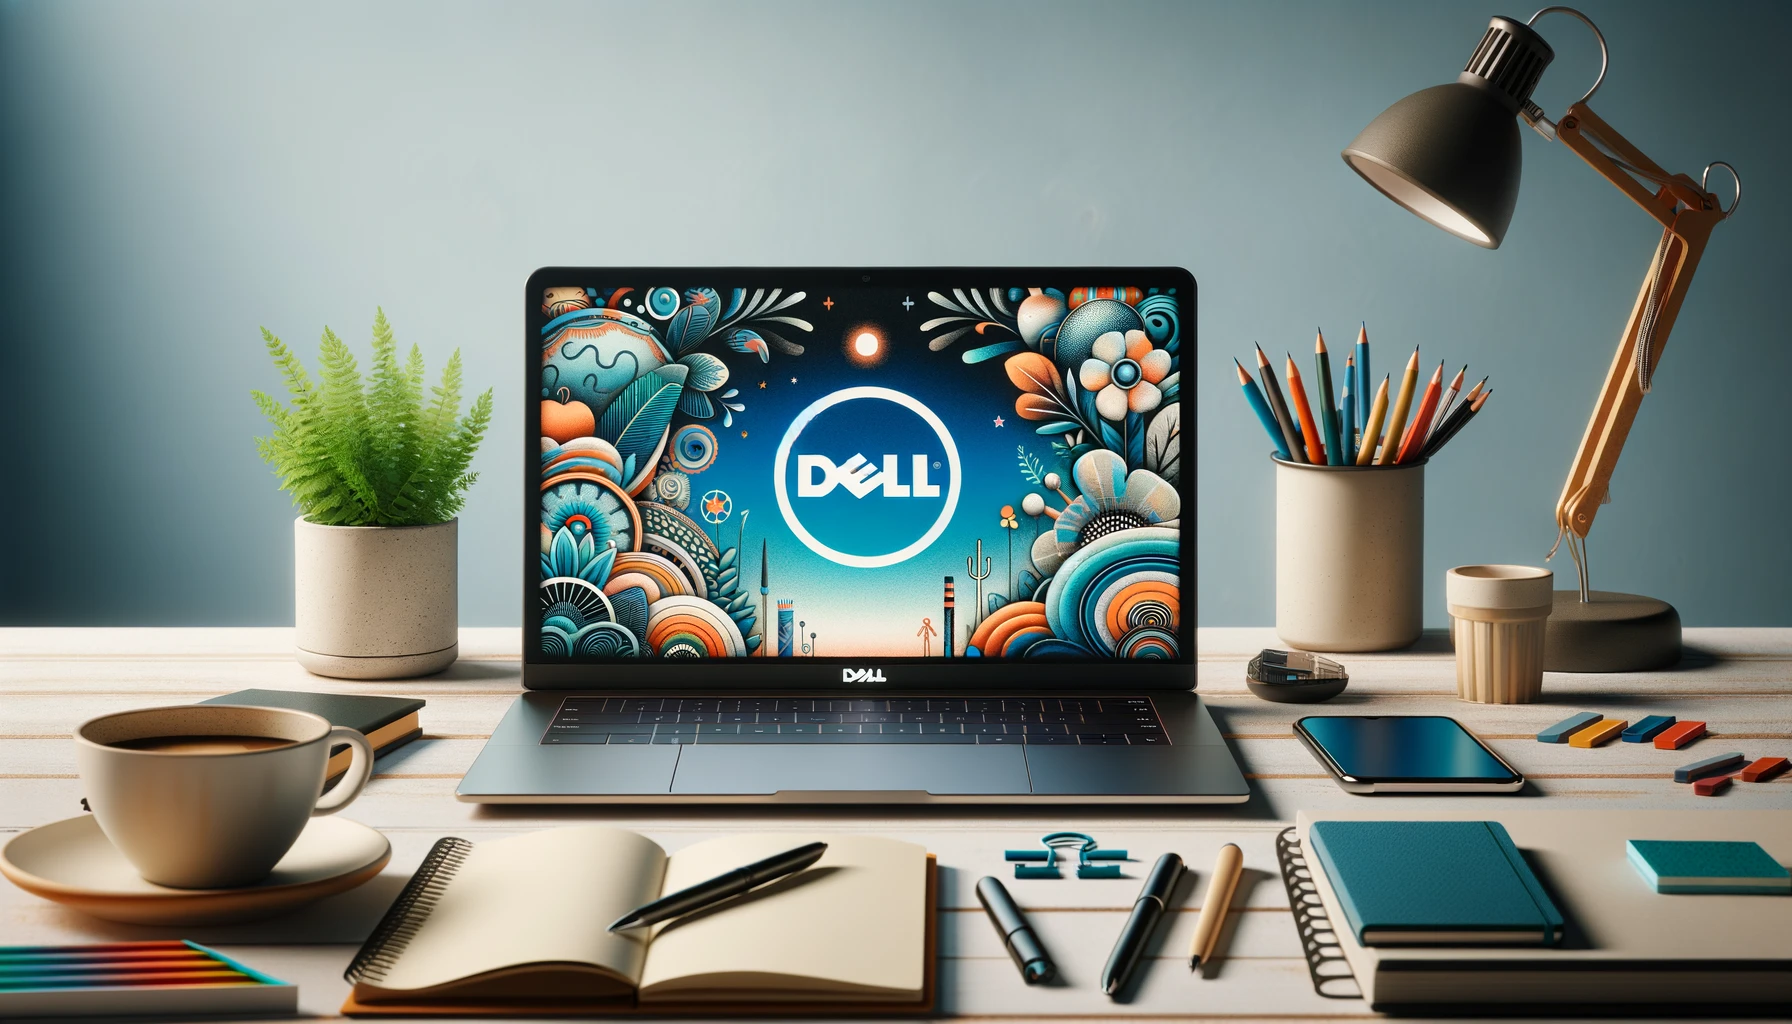 The image above presents a visually appealing stock photo showcasing a Dell laptop, perfectly complemented by creative workspace elements to evoke a sense of productivity and creativity within a modern work setting.